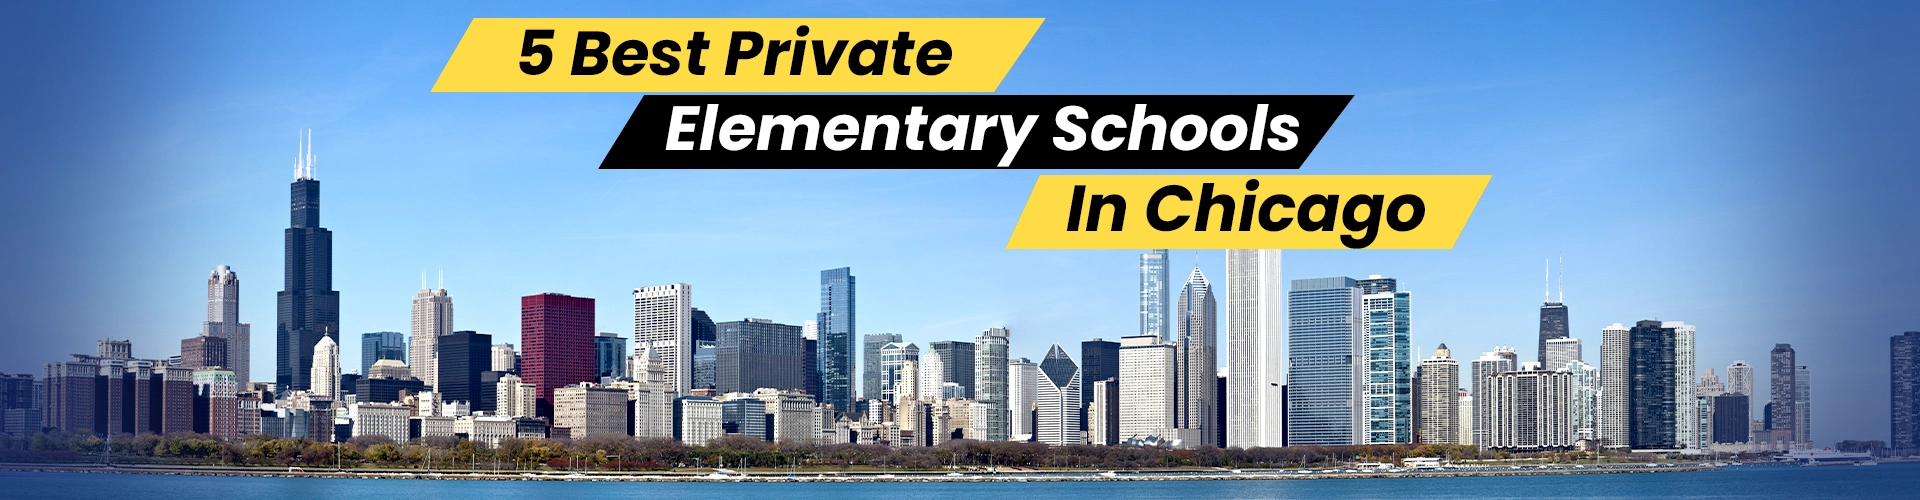 5 Best Private Elementary Schools In Chicago